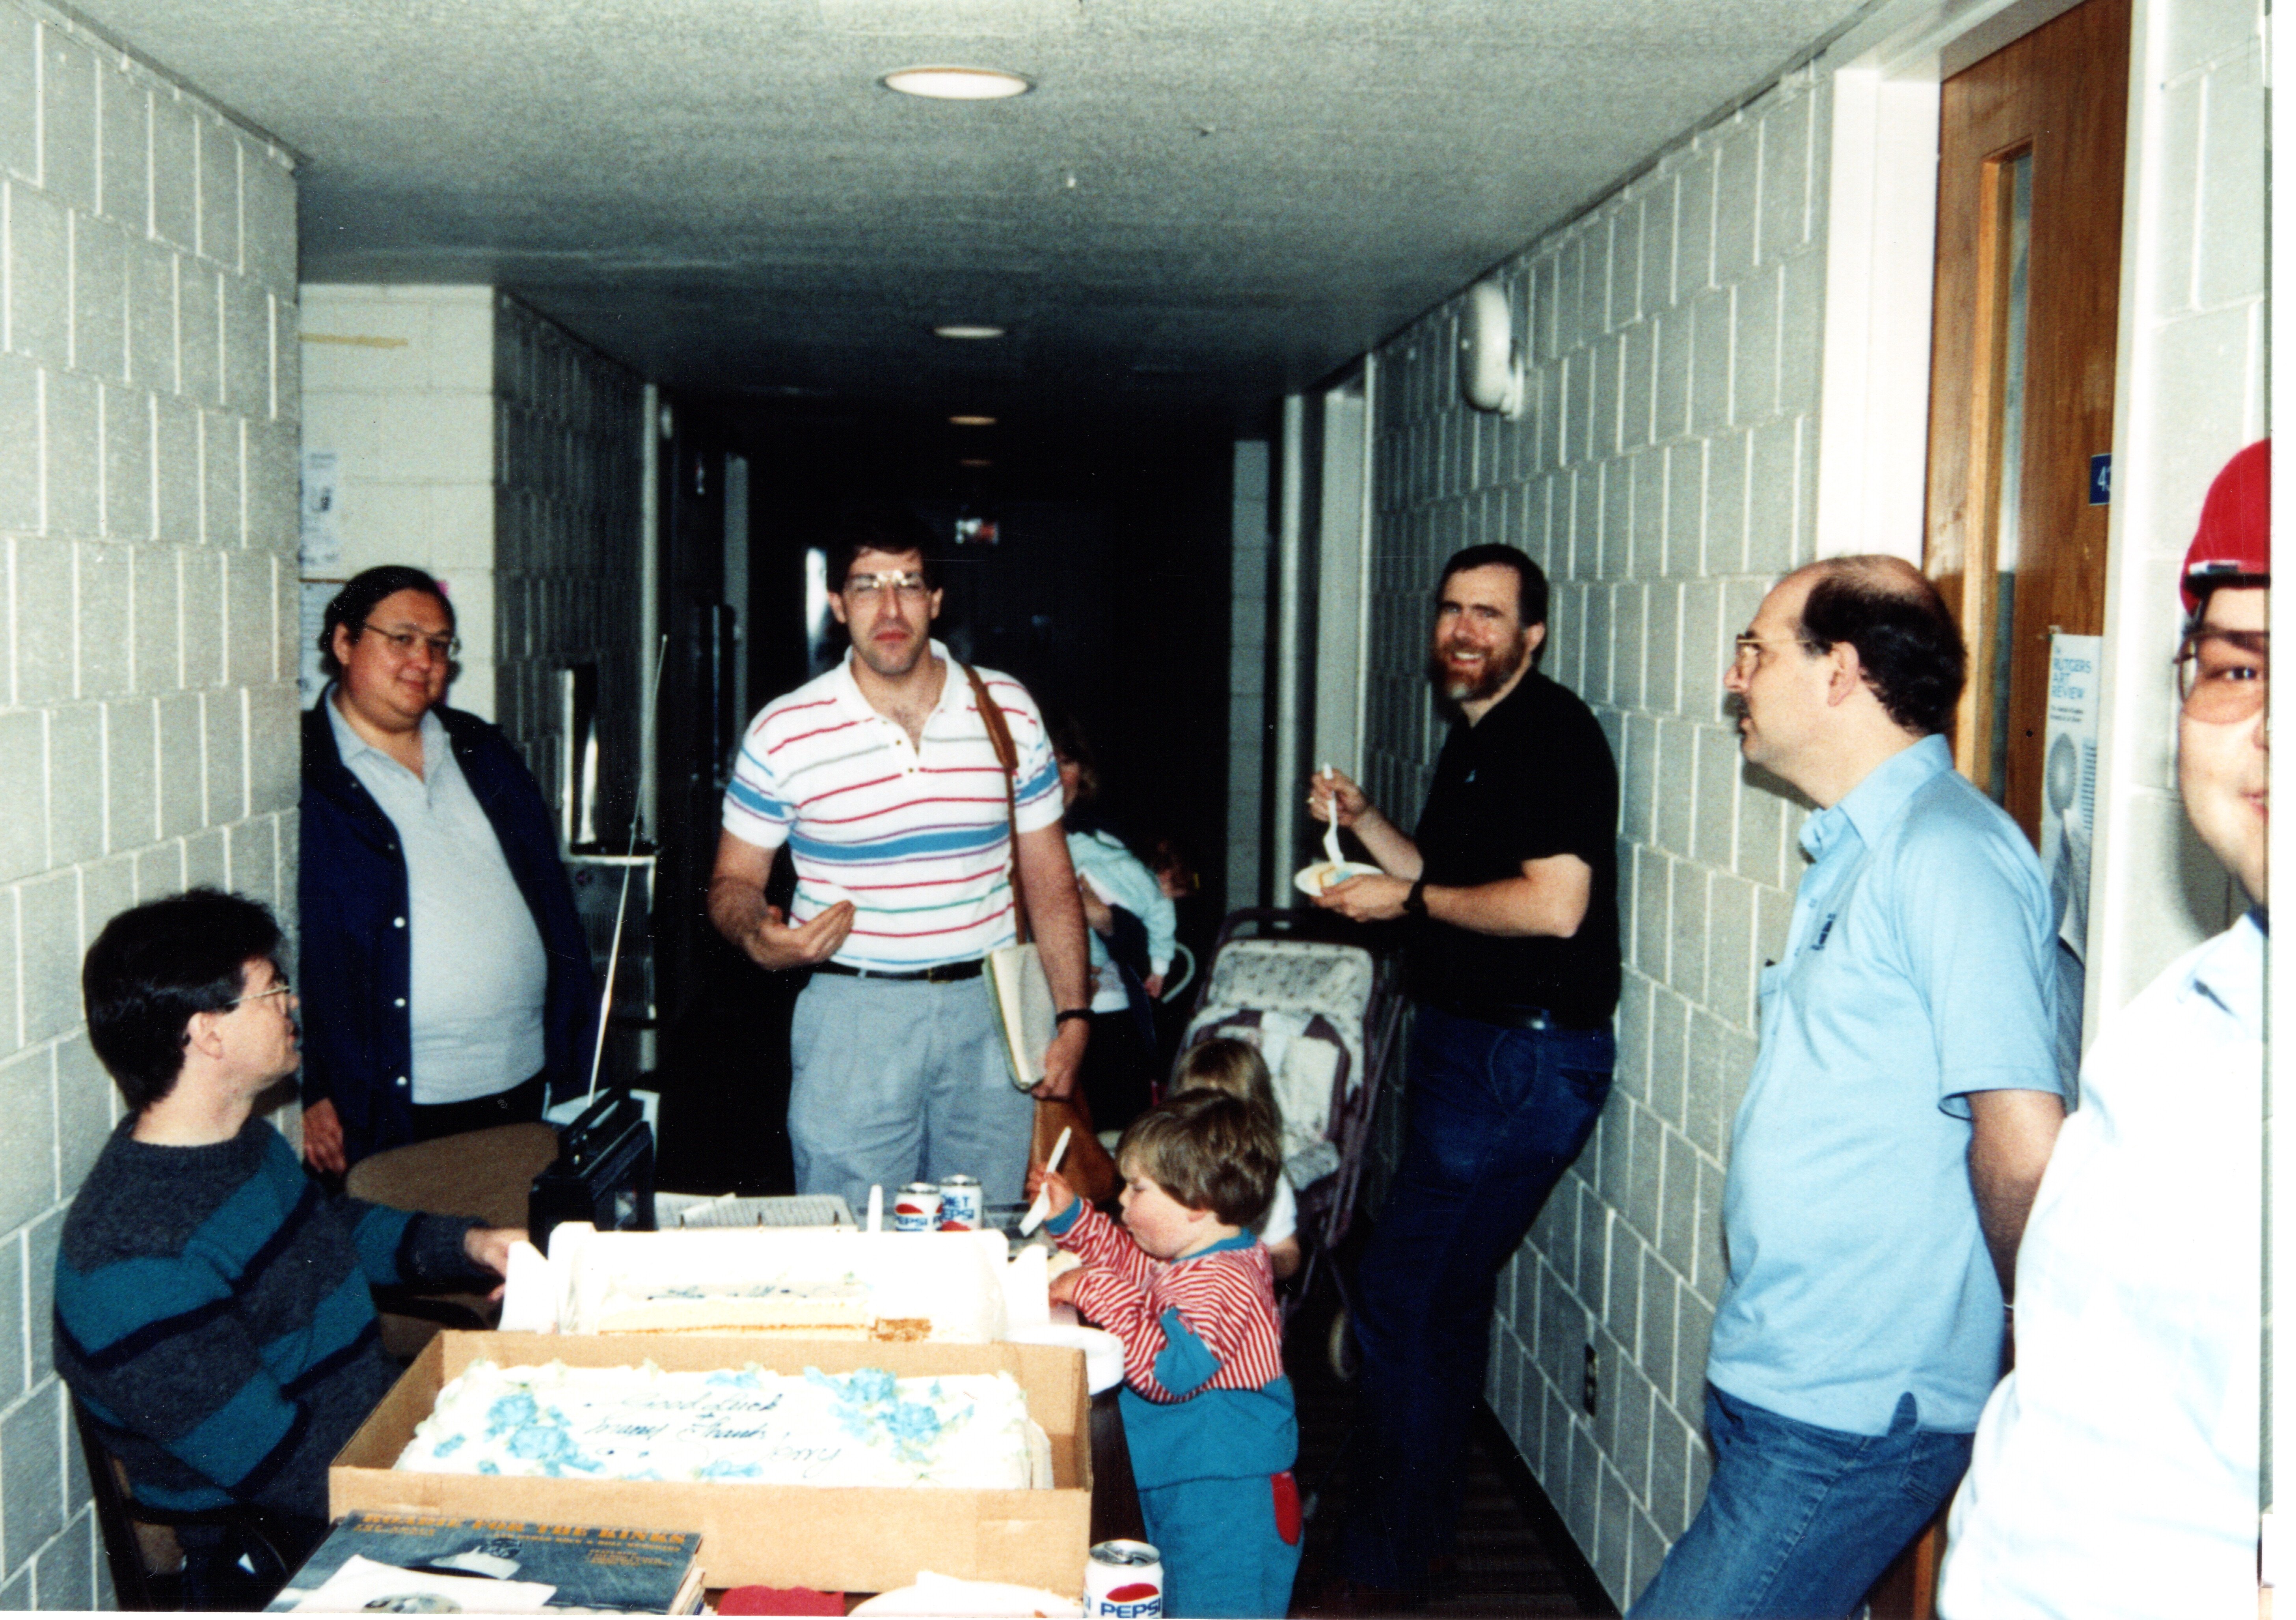 1990 Broadcast Administrator - Jerry Donnelly Leaves